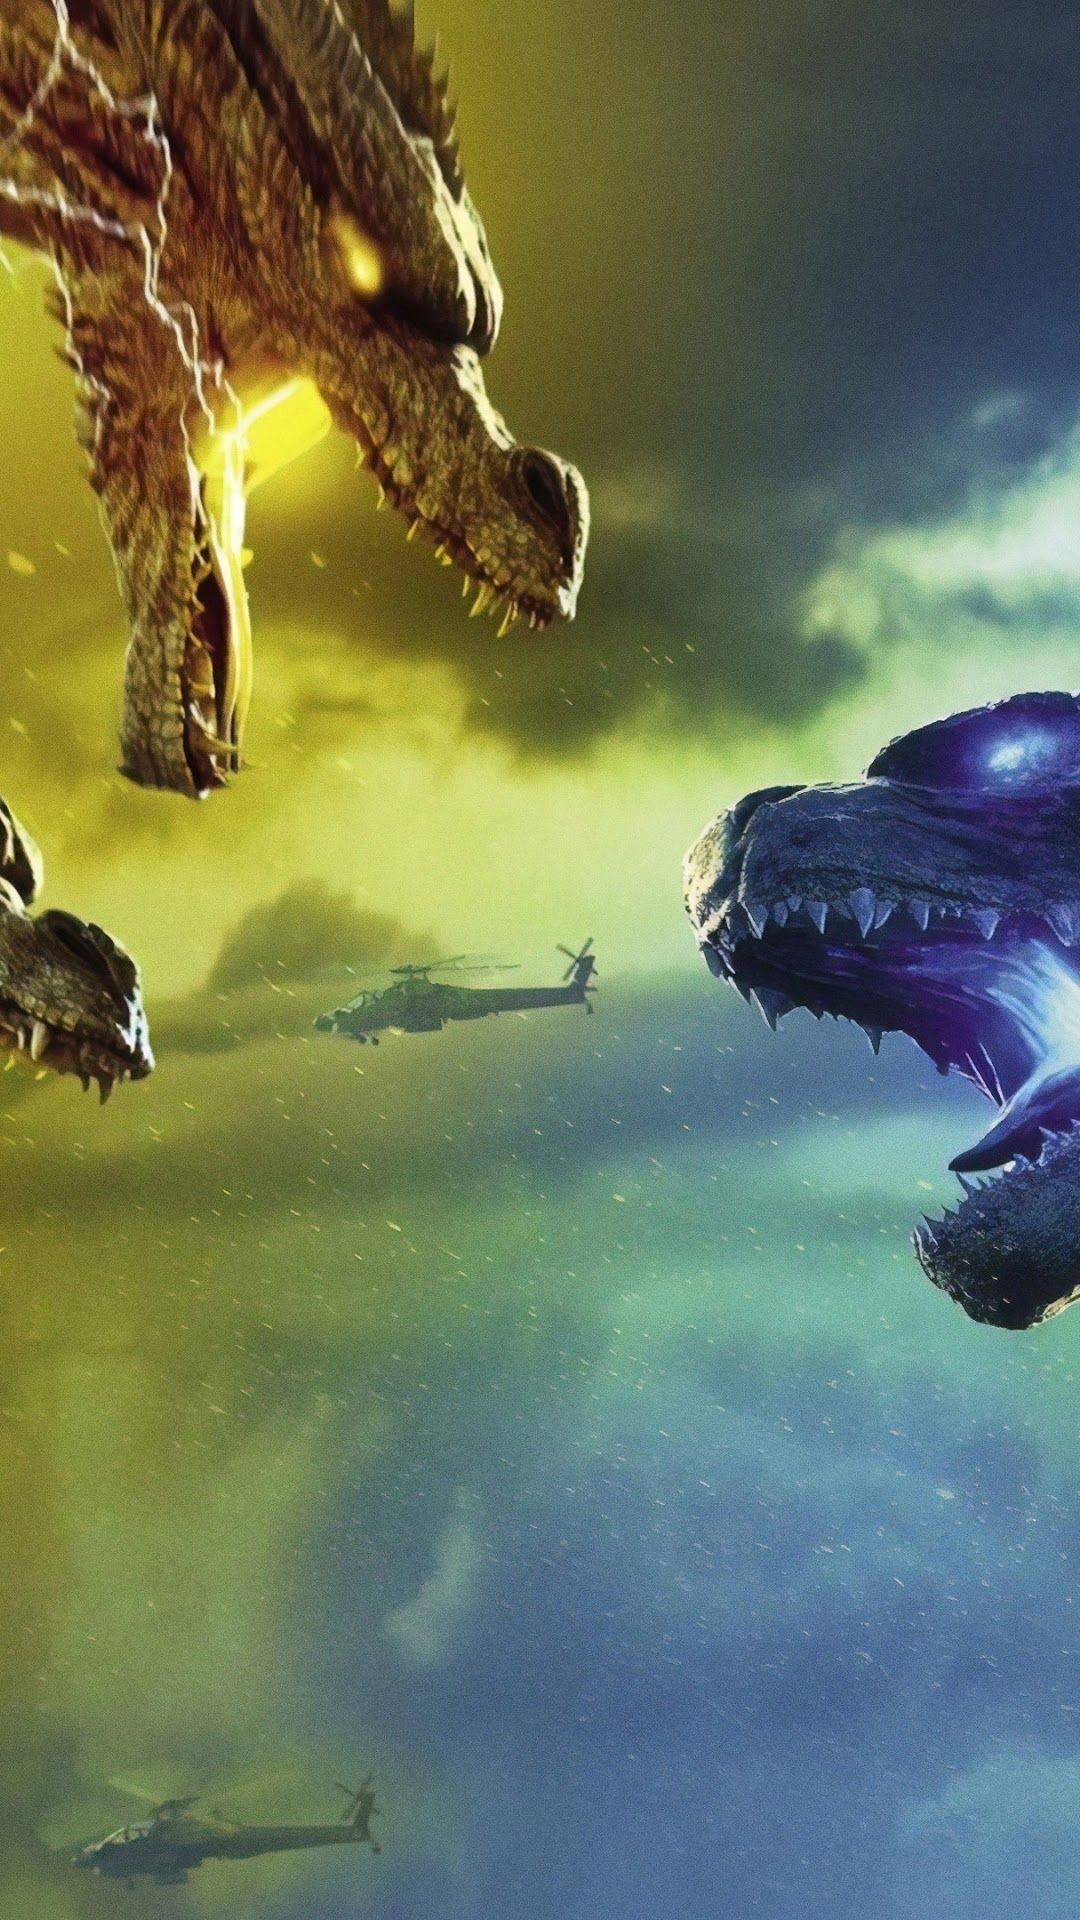 Godzilla vs. King Ghidorah, Godzilla: King of the Monsters phone HD Wallpaper, Image, Background, Photo and Picture